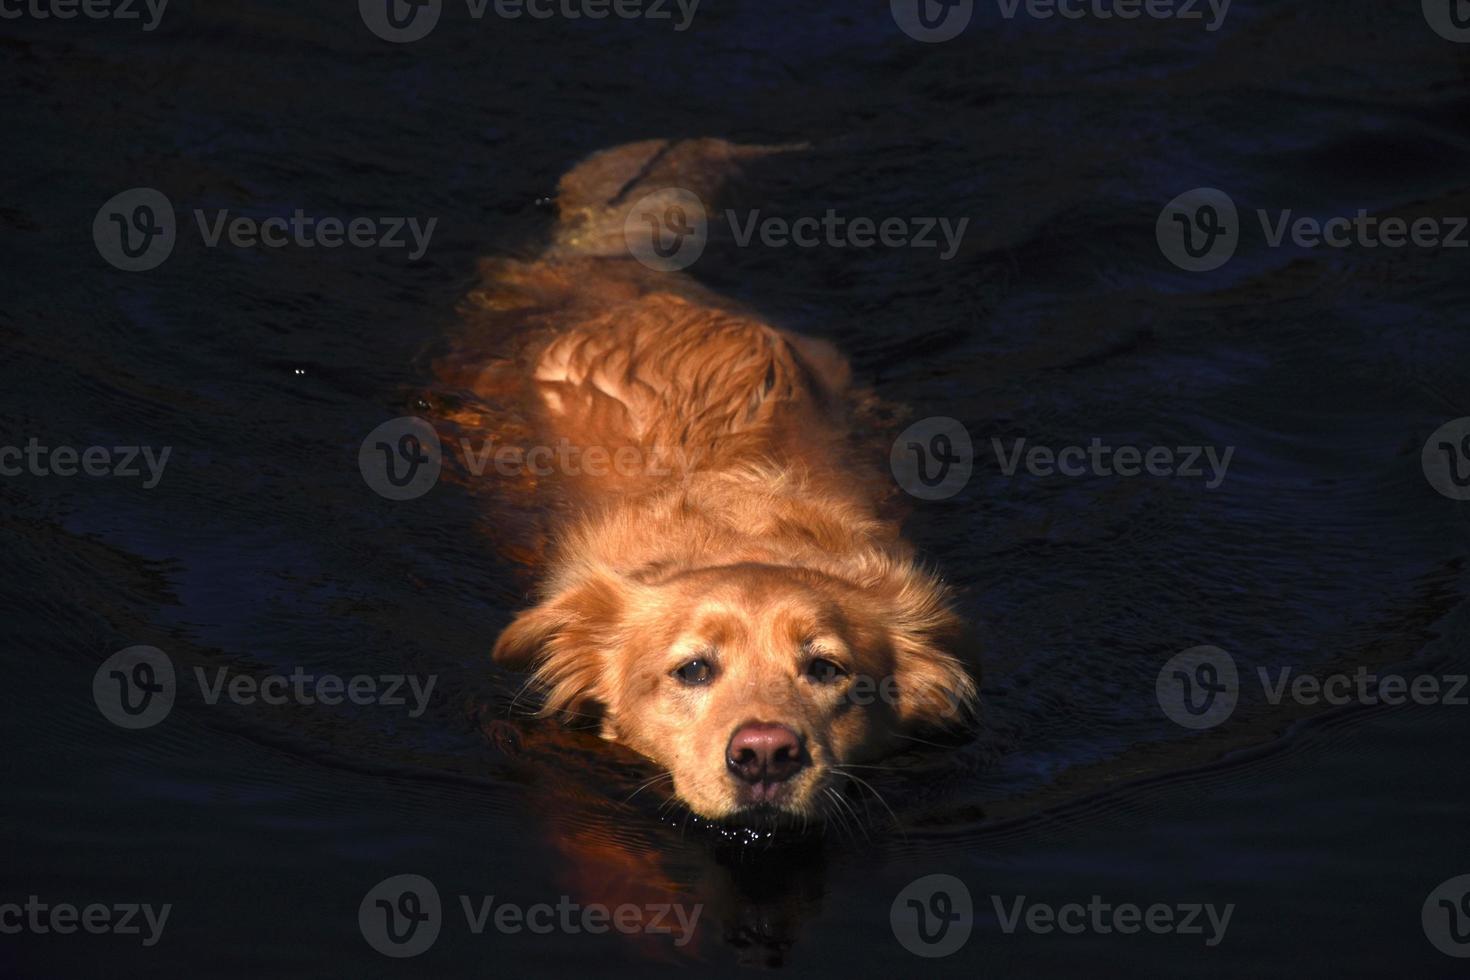 Yarmouth Toller Retriever Dog Swimming in Shallow Waters photo